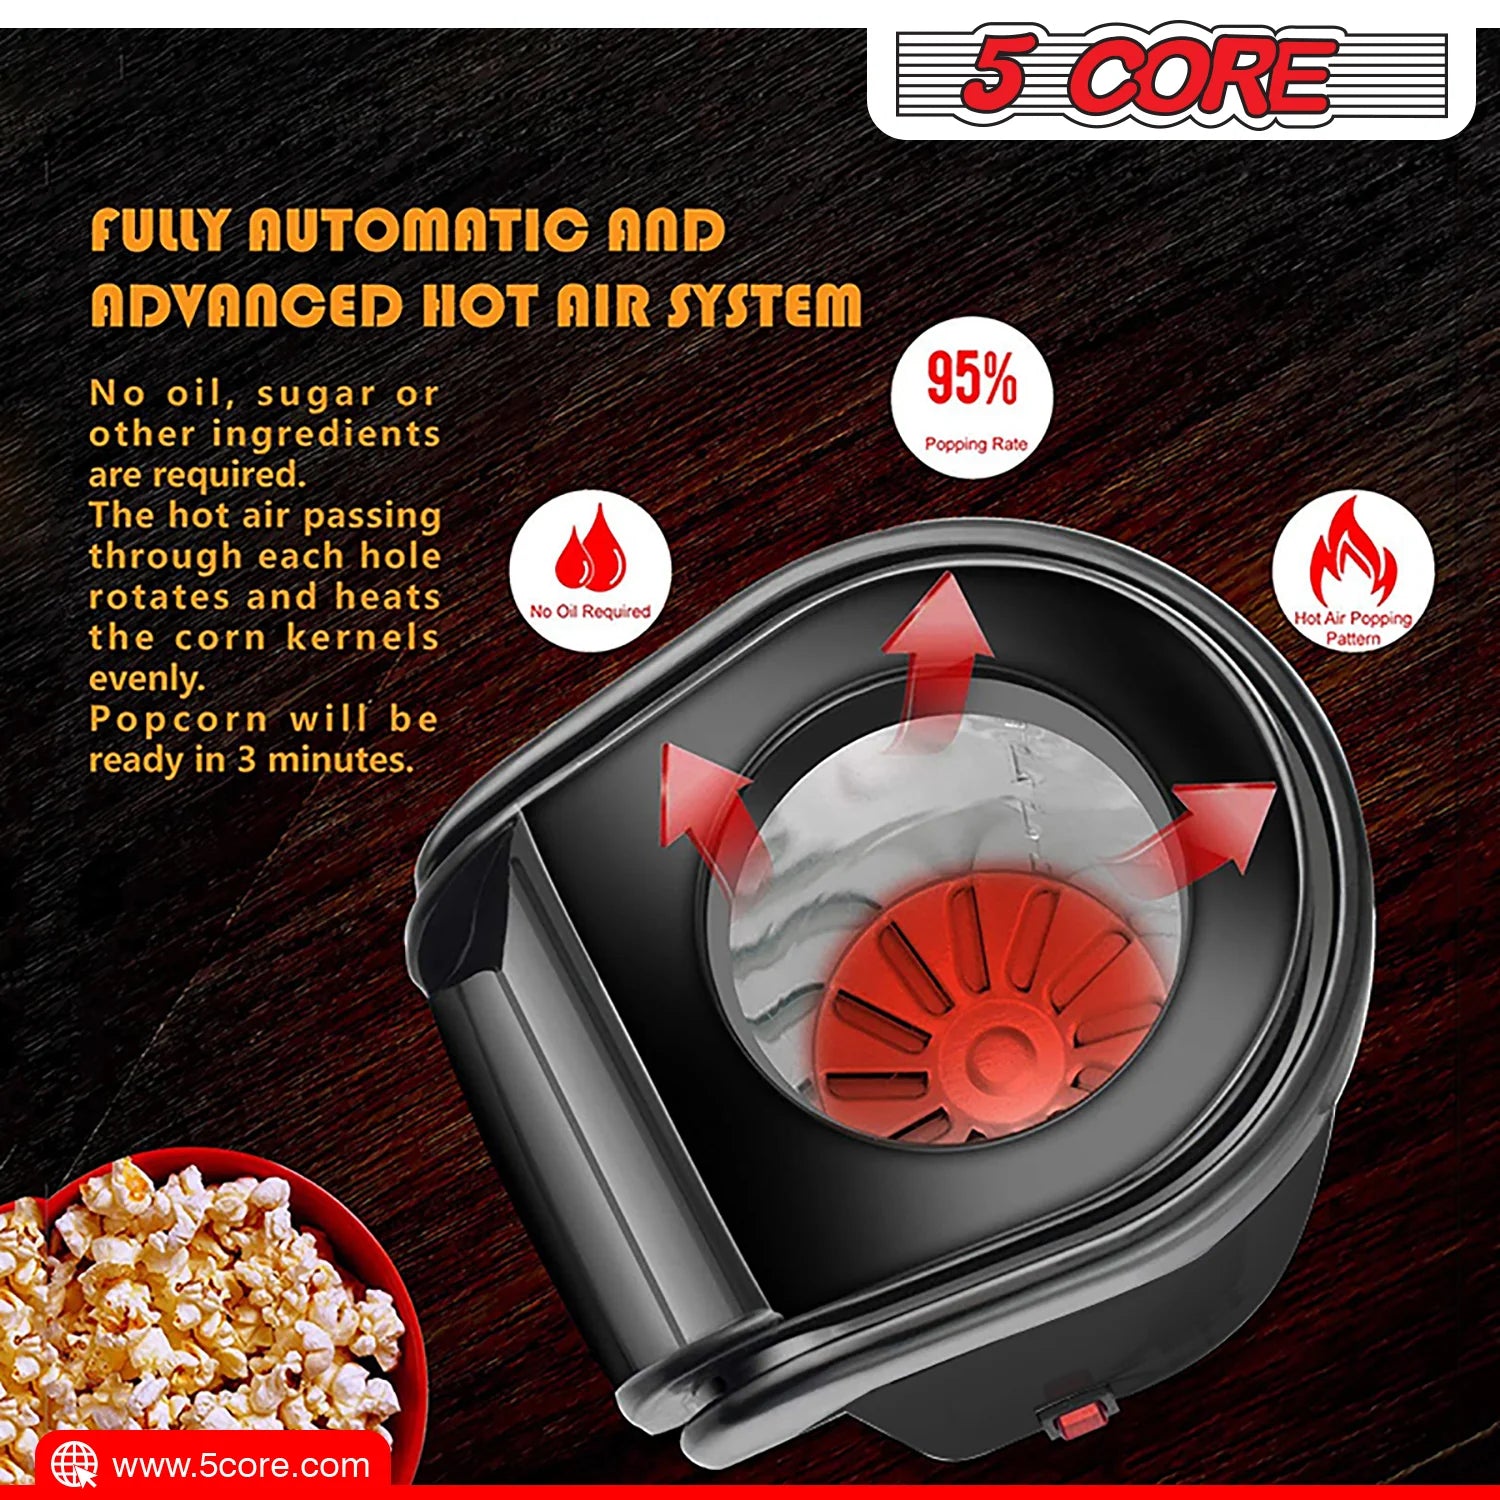 5 Core Hot Air Popcorn Machine 16 Cup Capacity • Electric Oil-Free Kernel Popper Bpa-Free Food Safe